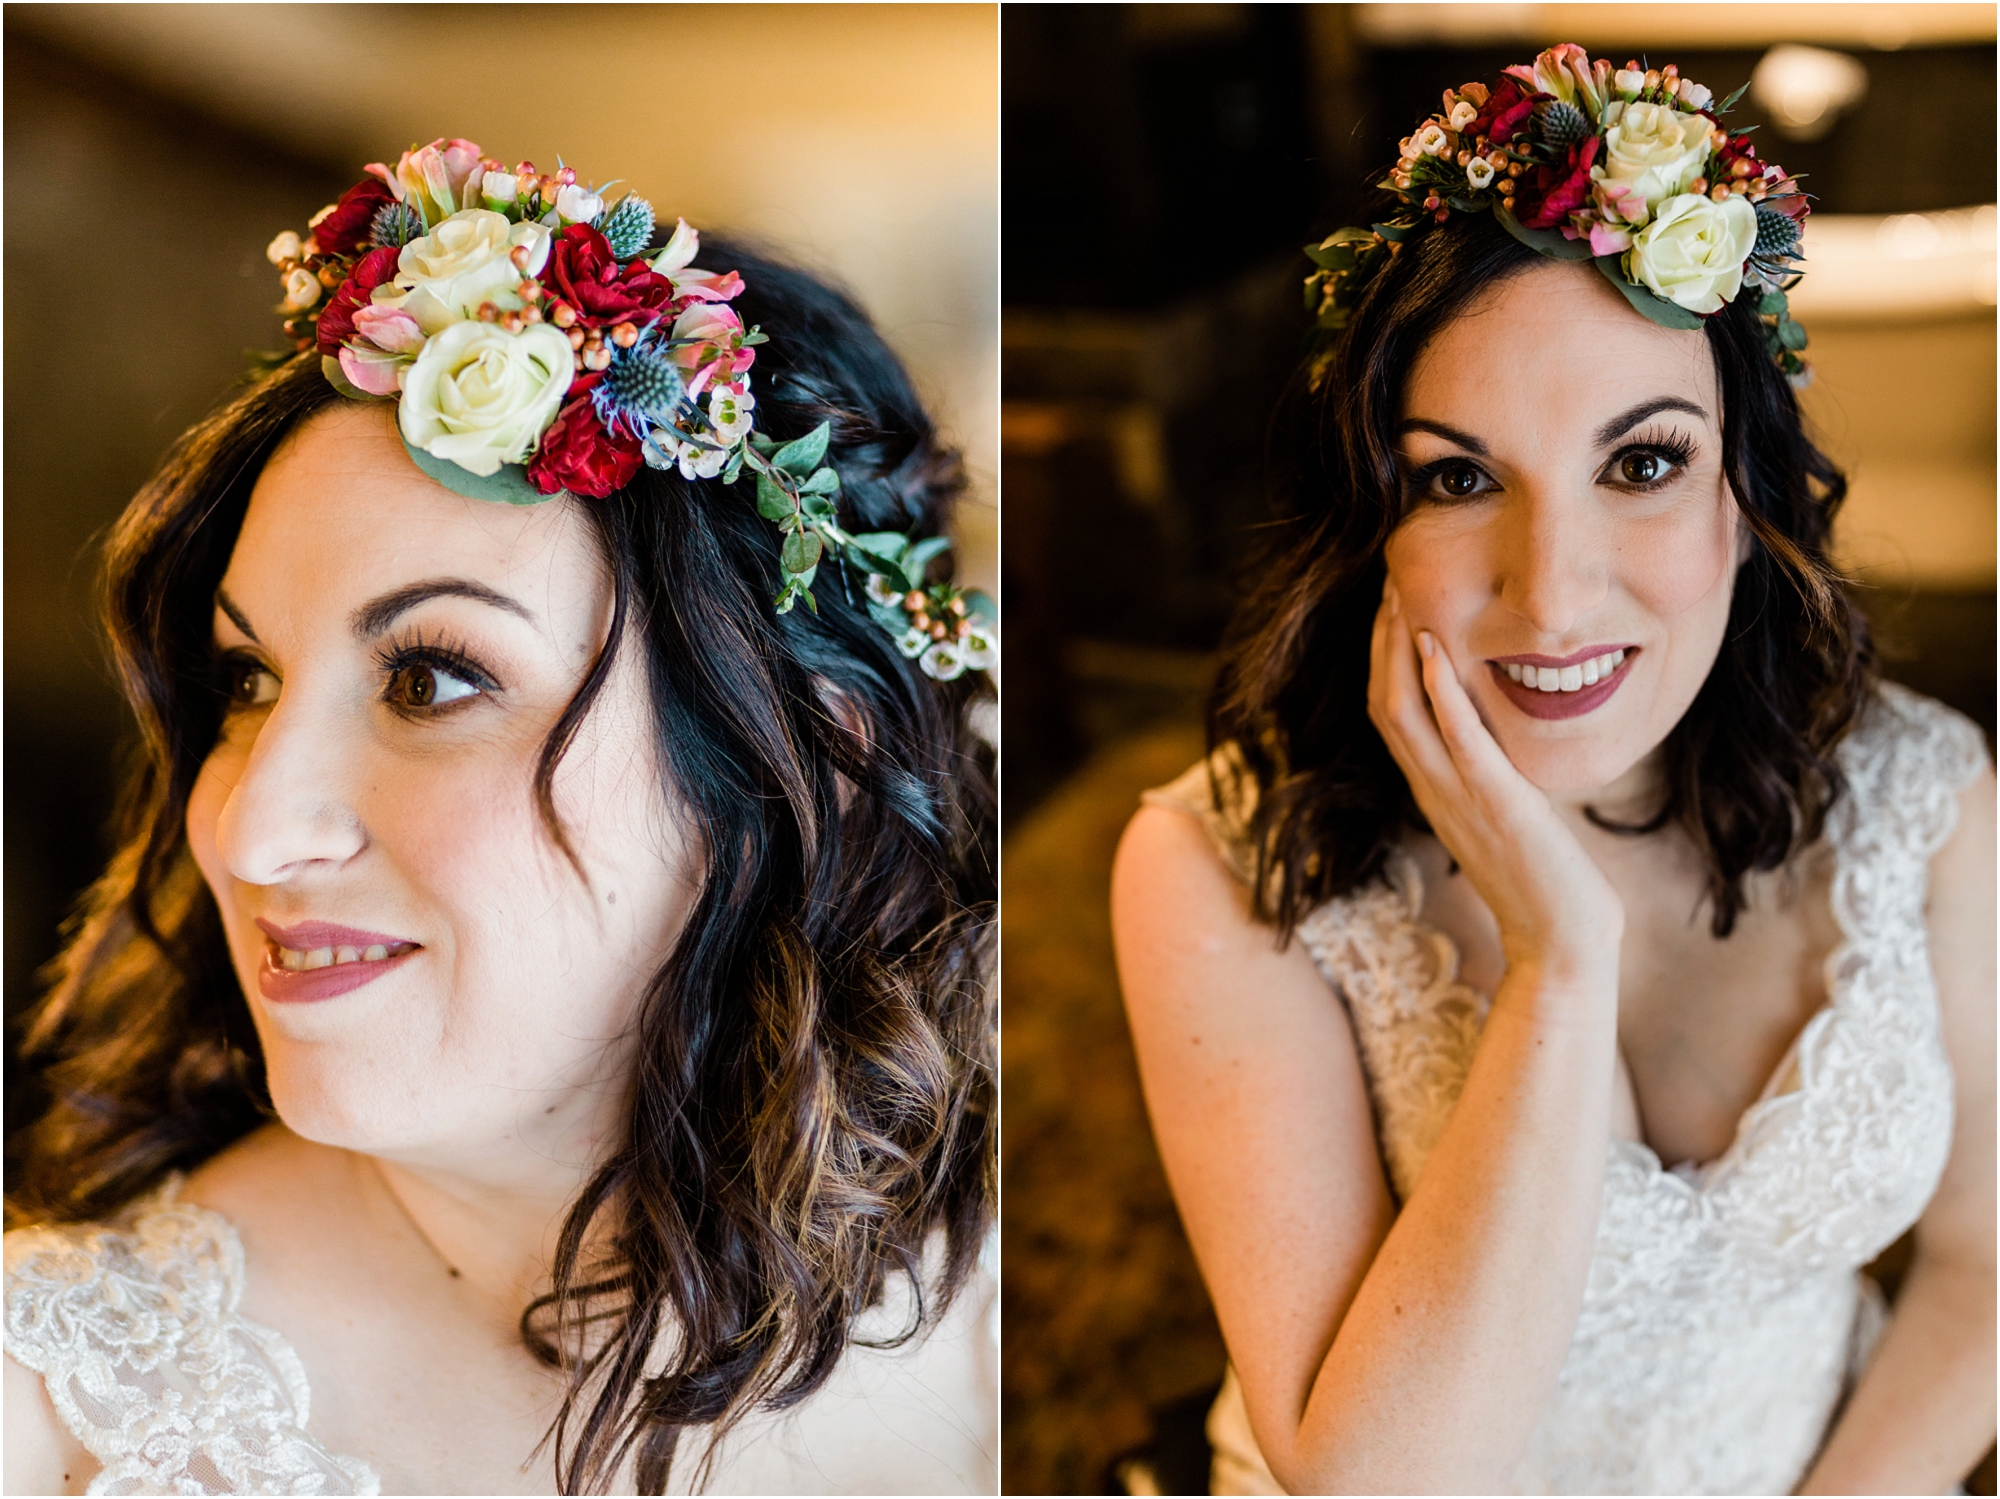 A stunning Central Oregon winter elopement bride wearing her floral crown from Woodland Floral in Sisters. | Erica Swantek Photography